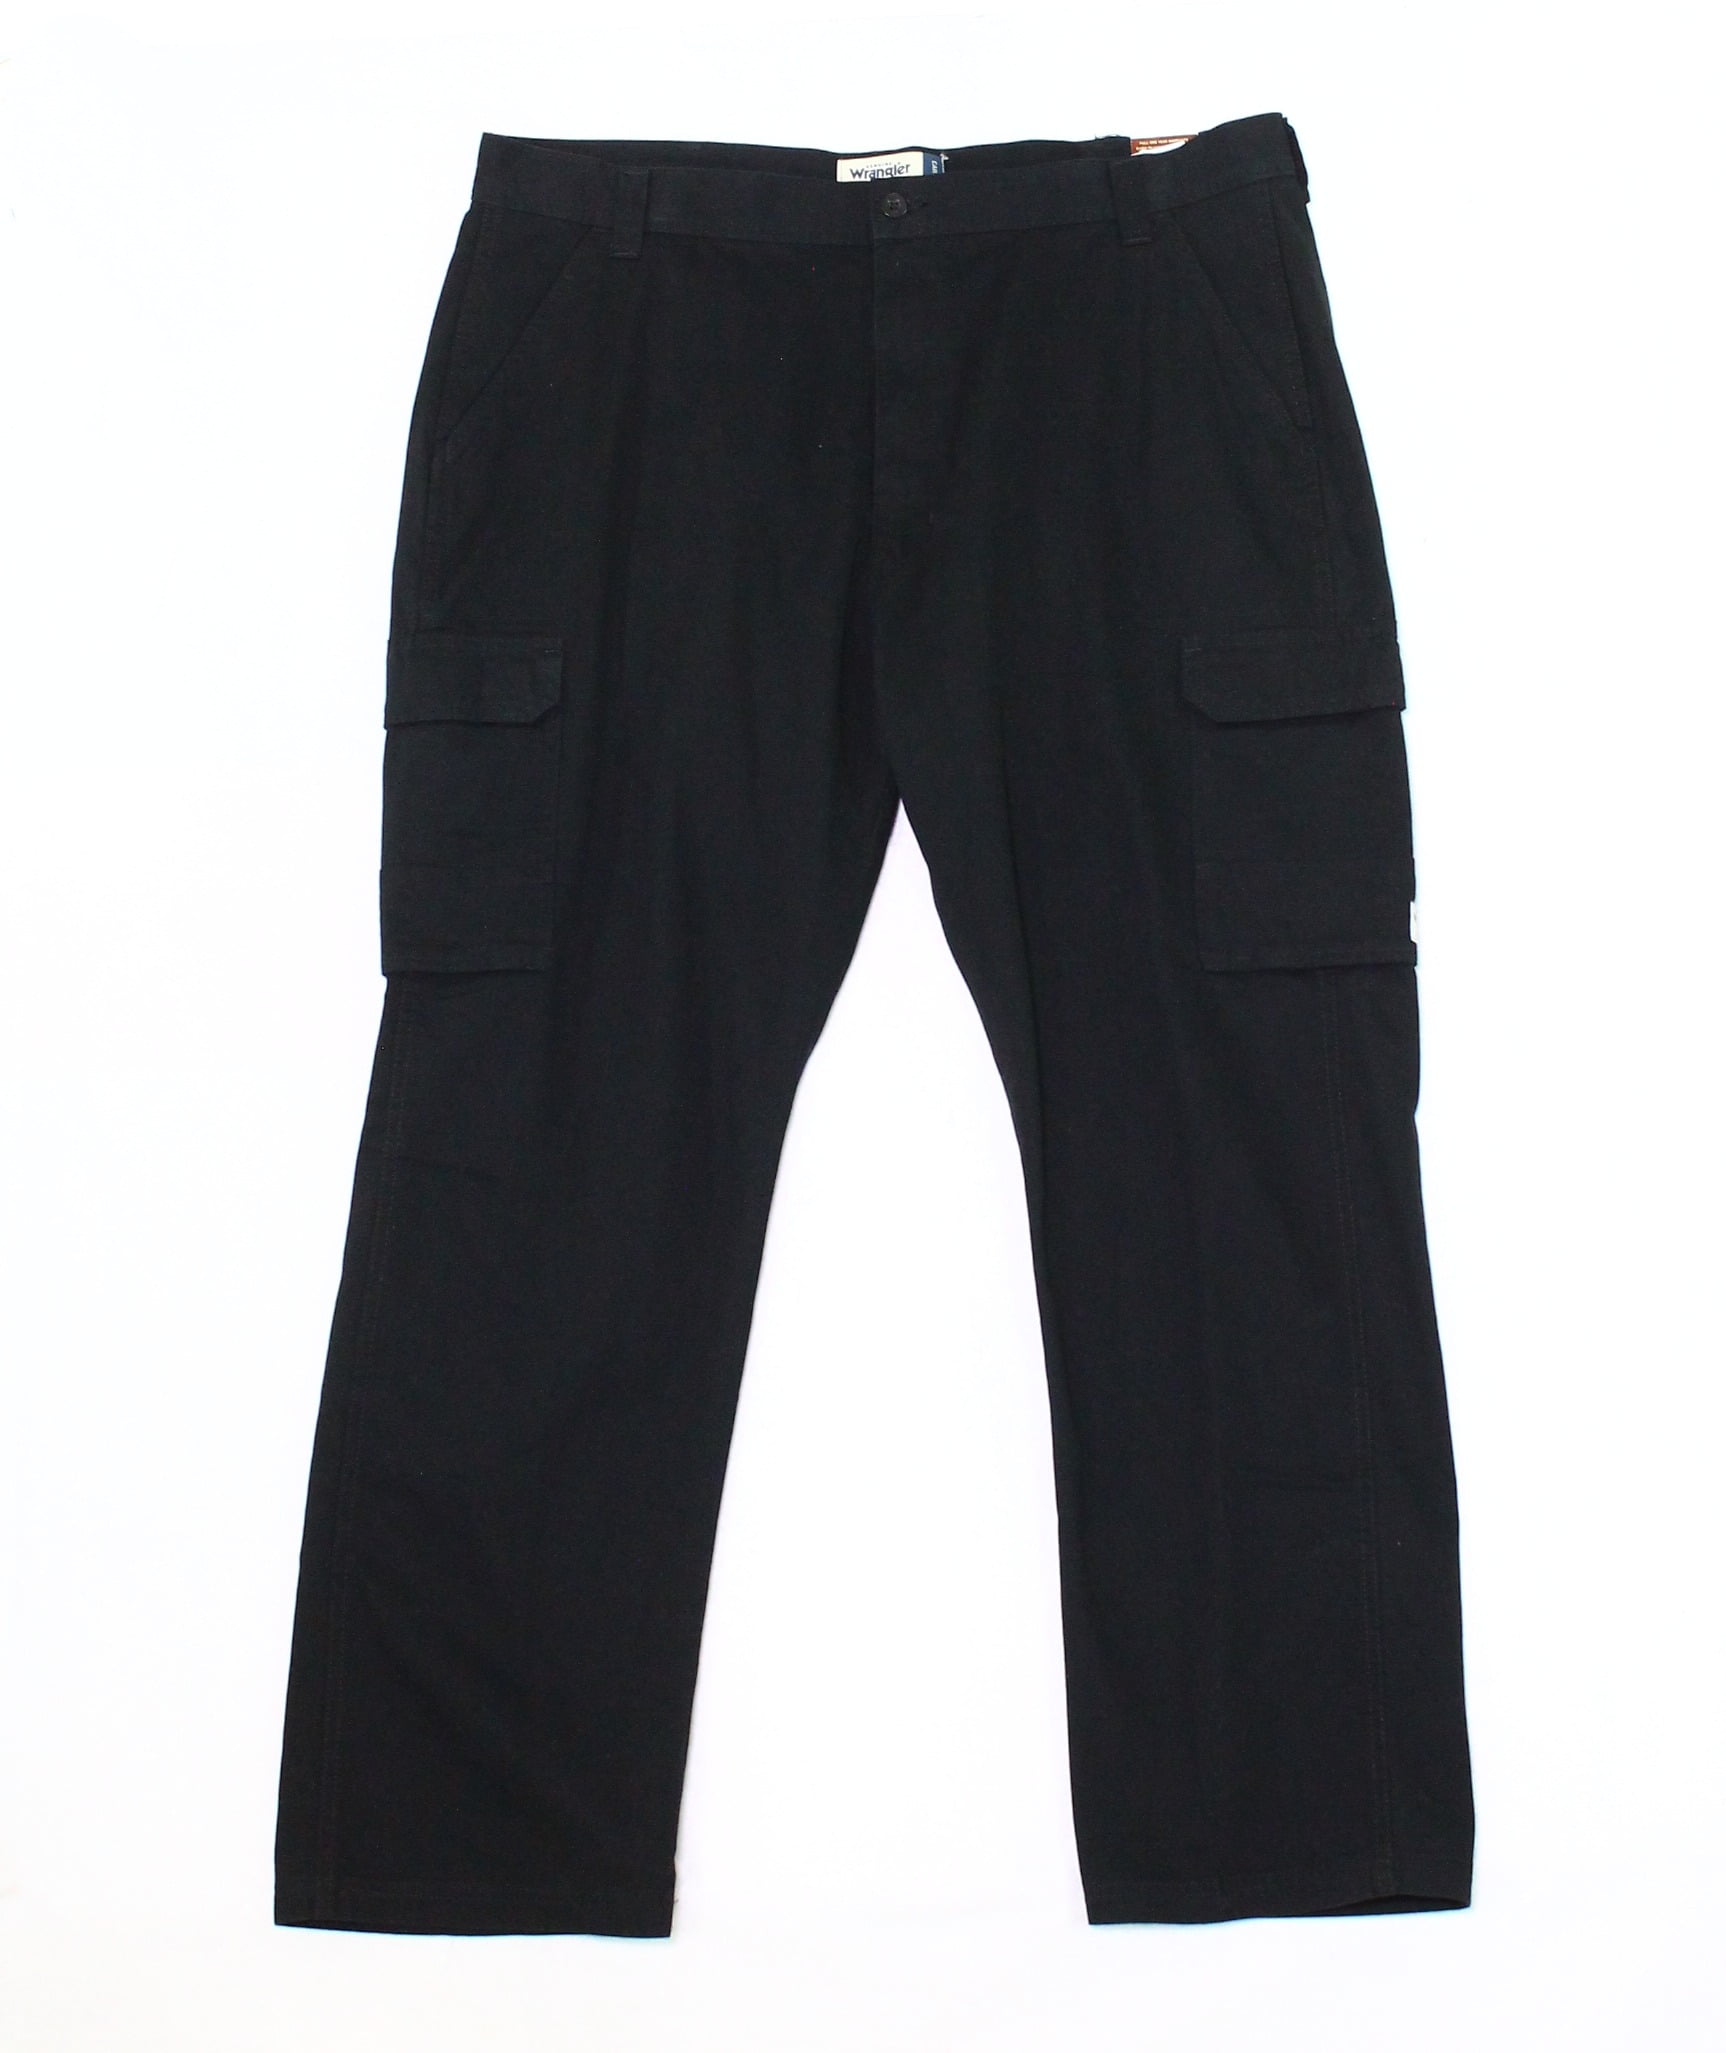 Wrangler NEW Deep Black Mens Size 40 Button-Front Twill Cargo Pants ...